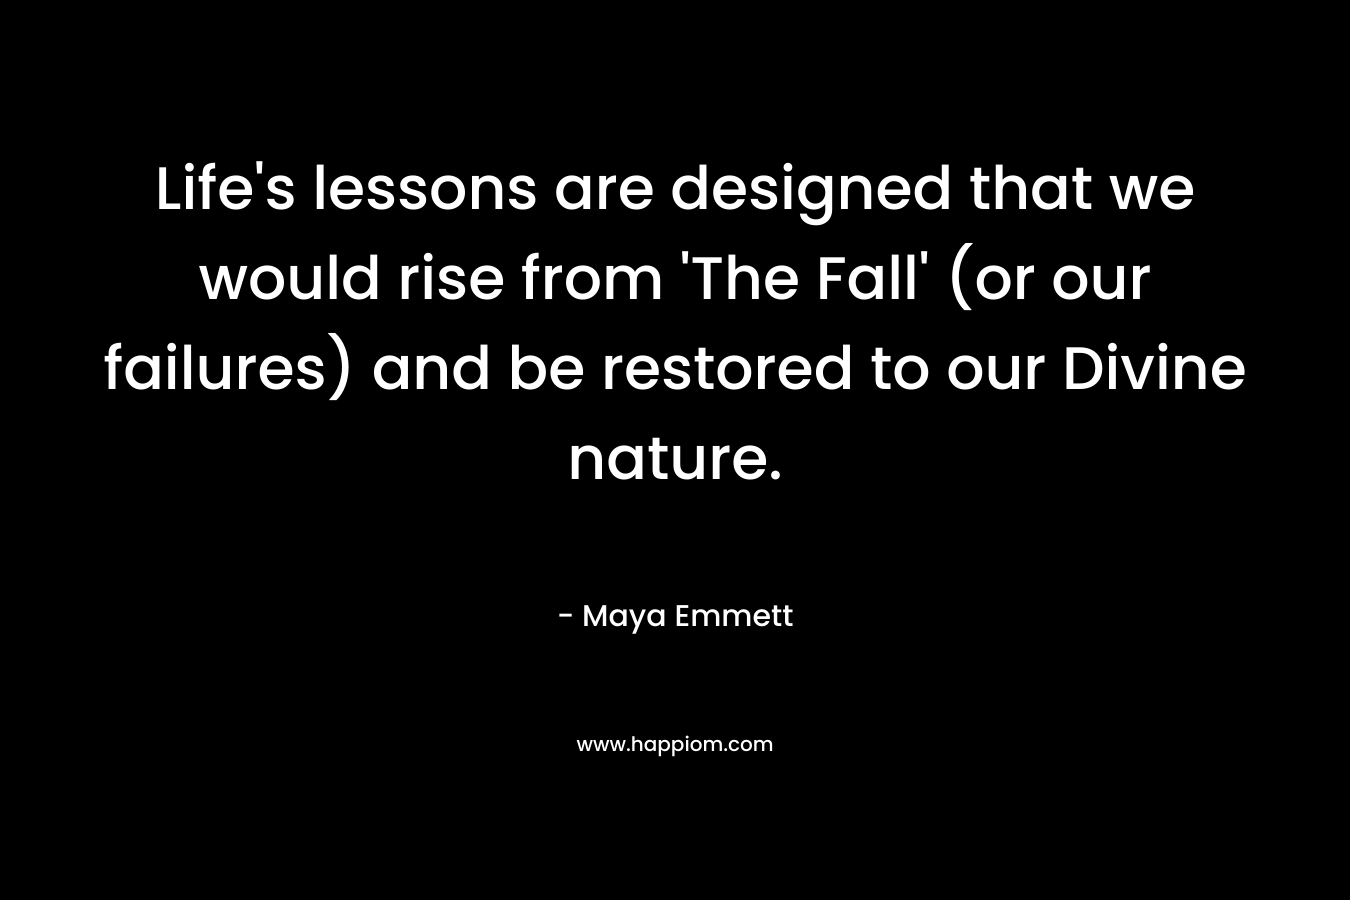 Life’s lessons are designed that we would rise from ‘The Fall’ (or our failures) and be restored to our Divine nature. – Maya Emmett